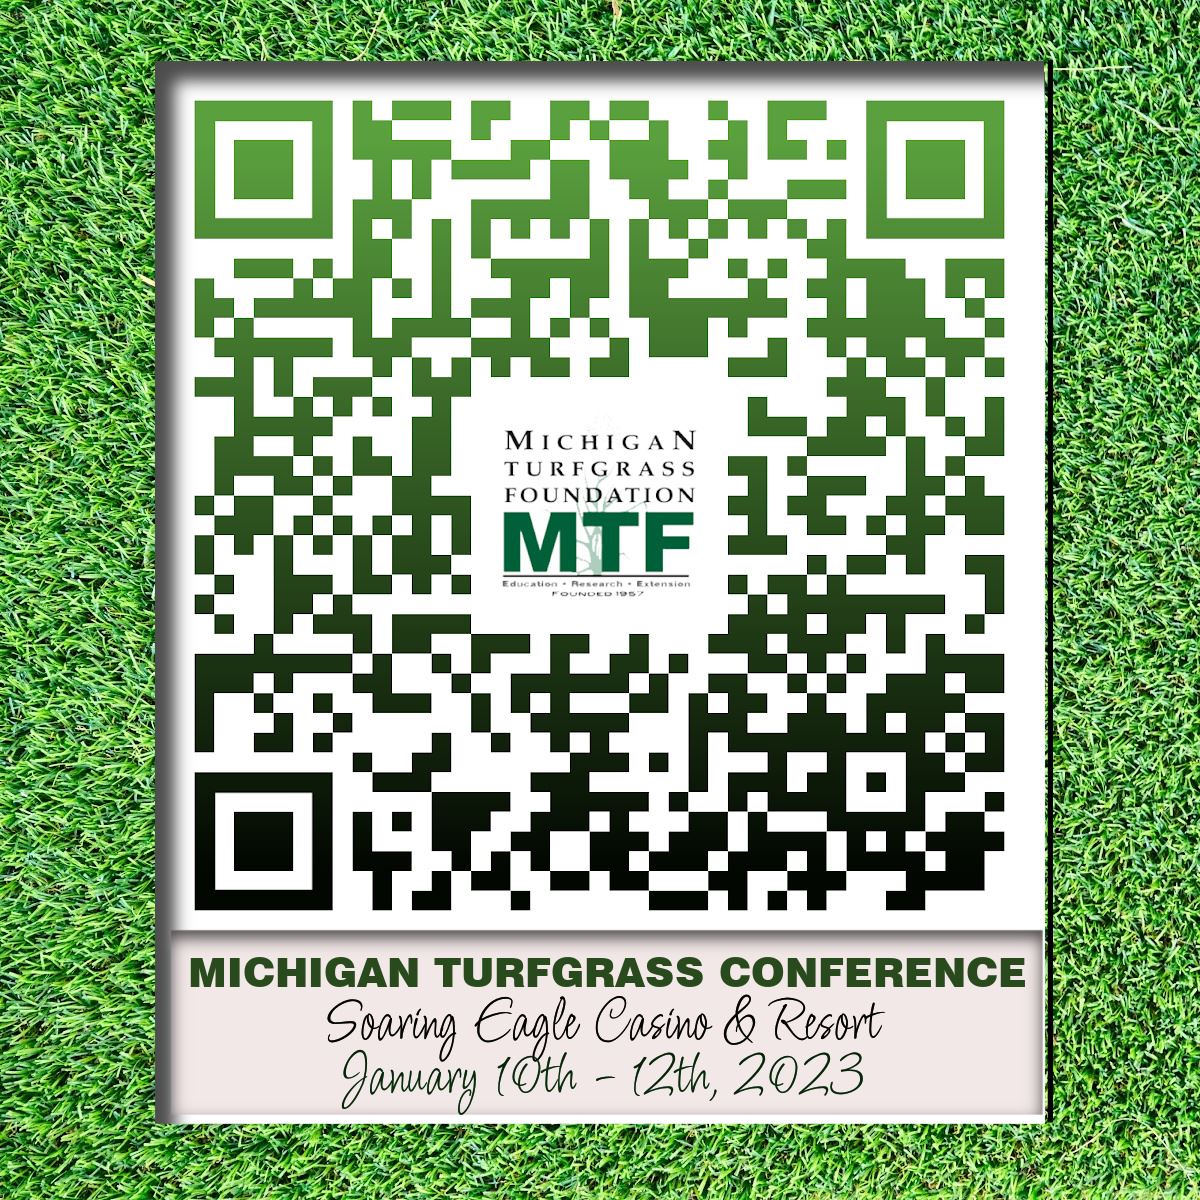 Scan the QR Code to register for the Michigan Turfgrass Conference